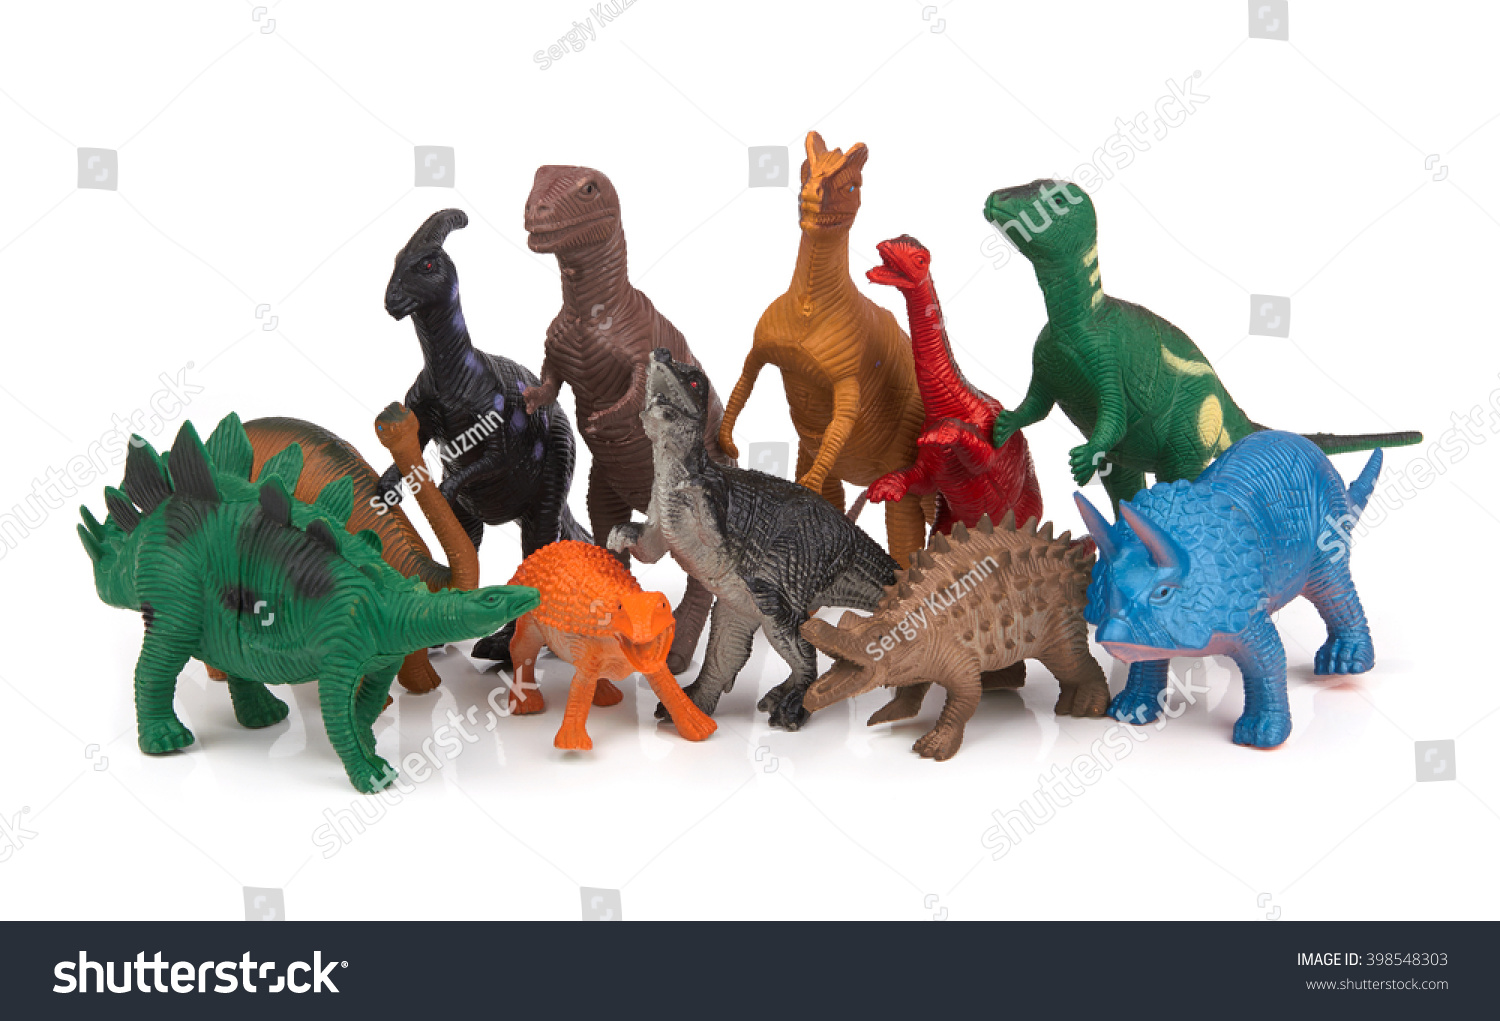 Group of toy dinosaurs on white background #398548303